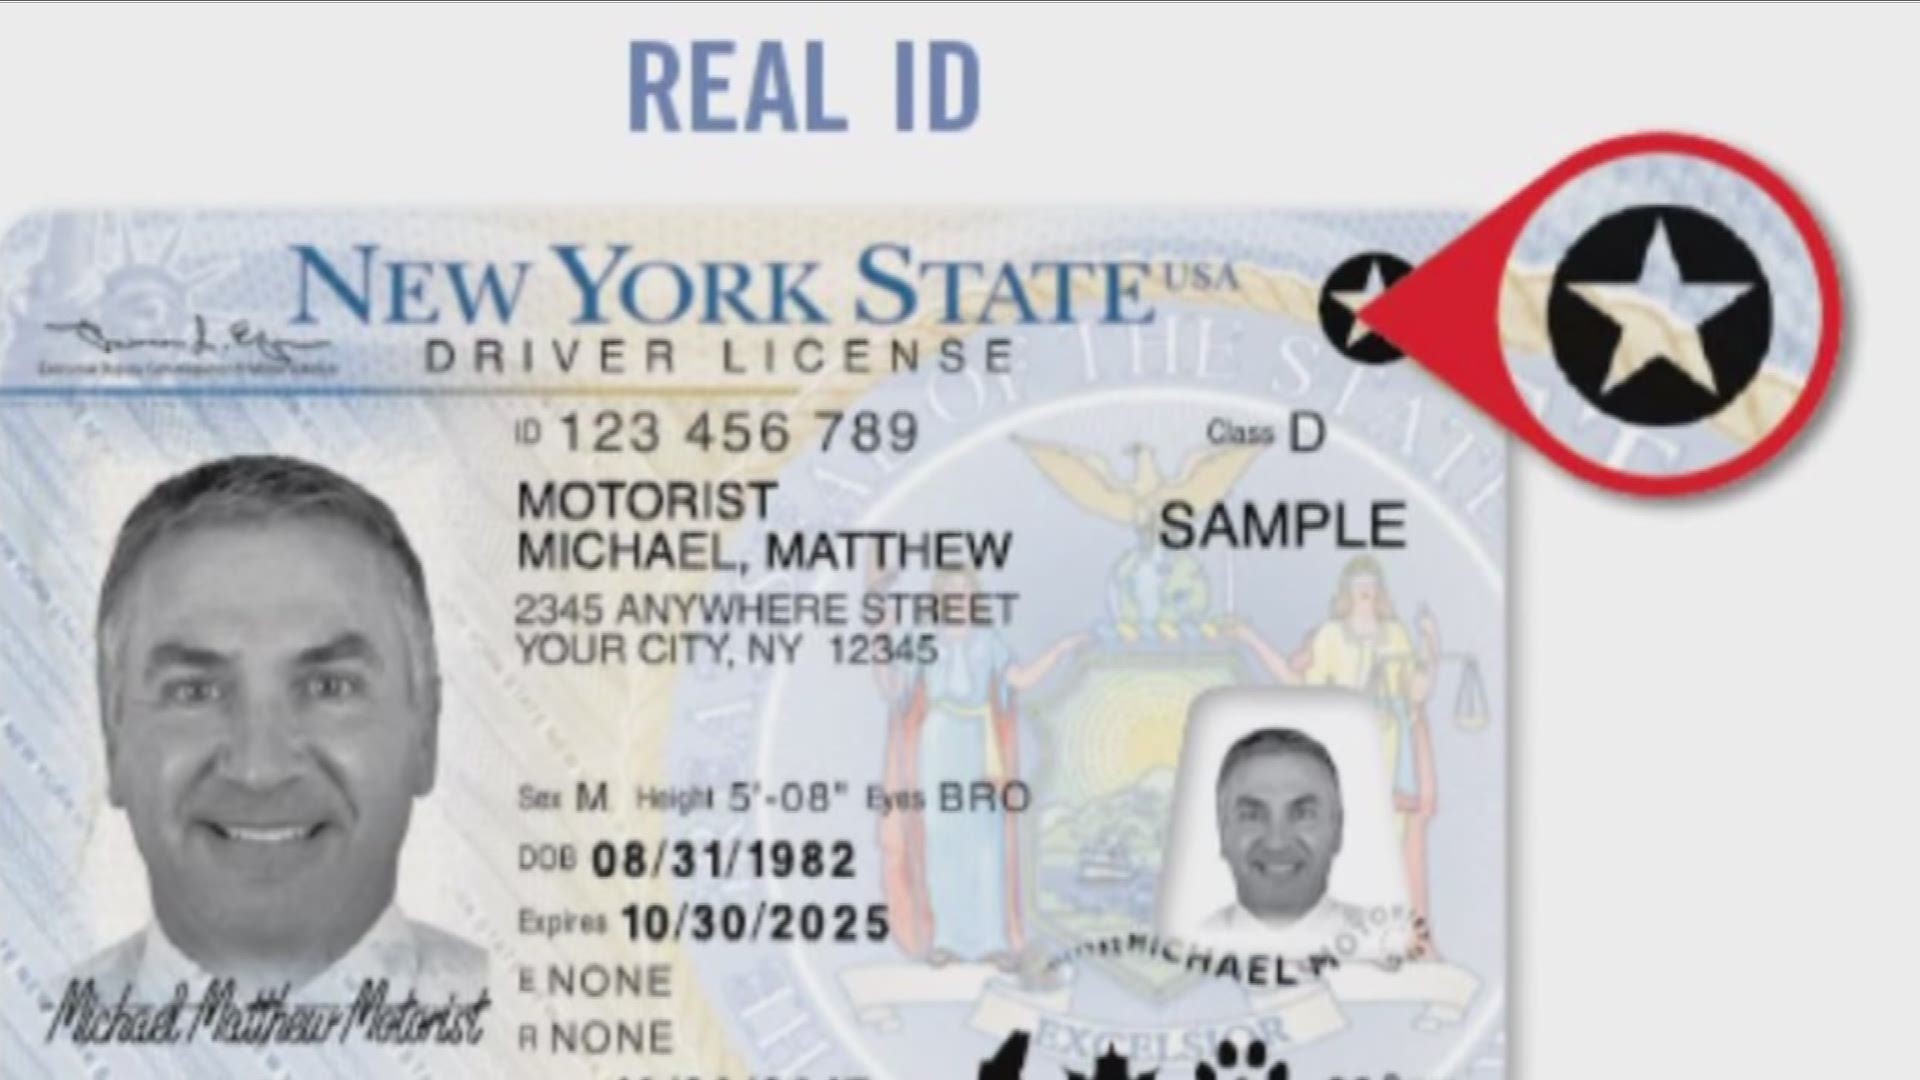 Starting October 2020, your regular New York state drivers license will not allow you to fly.  We explain how to be prepared to take that flight.